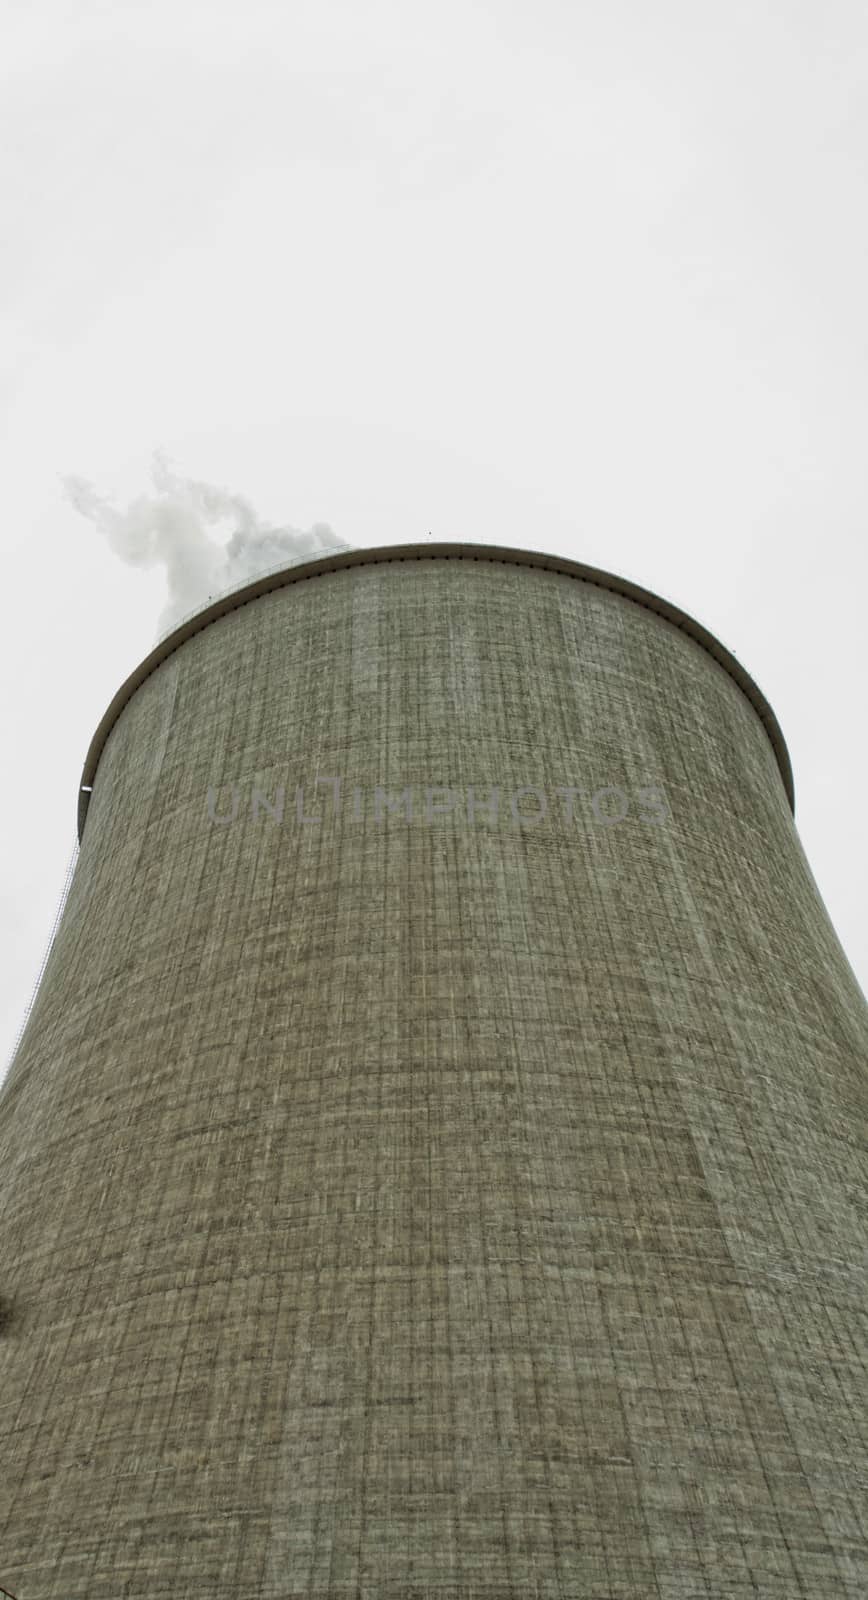 Cooling towers of a power plant by NagyDodo